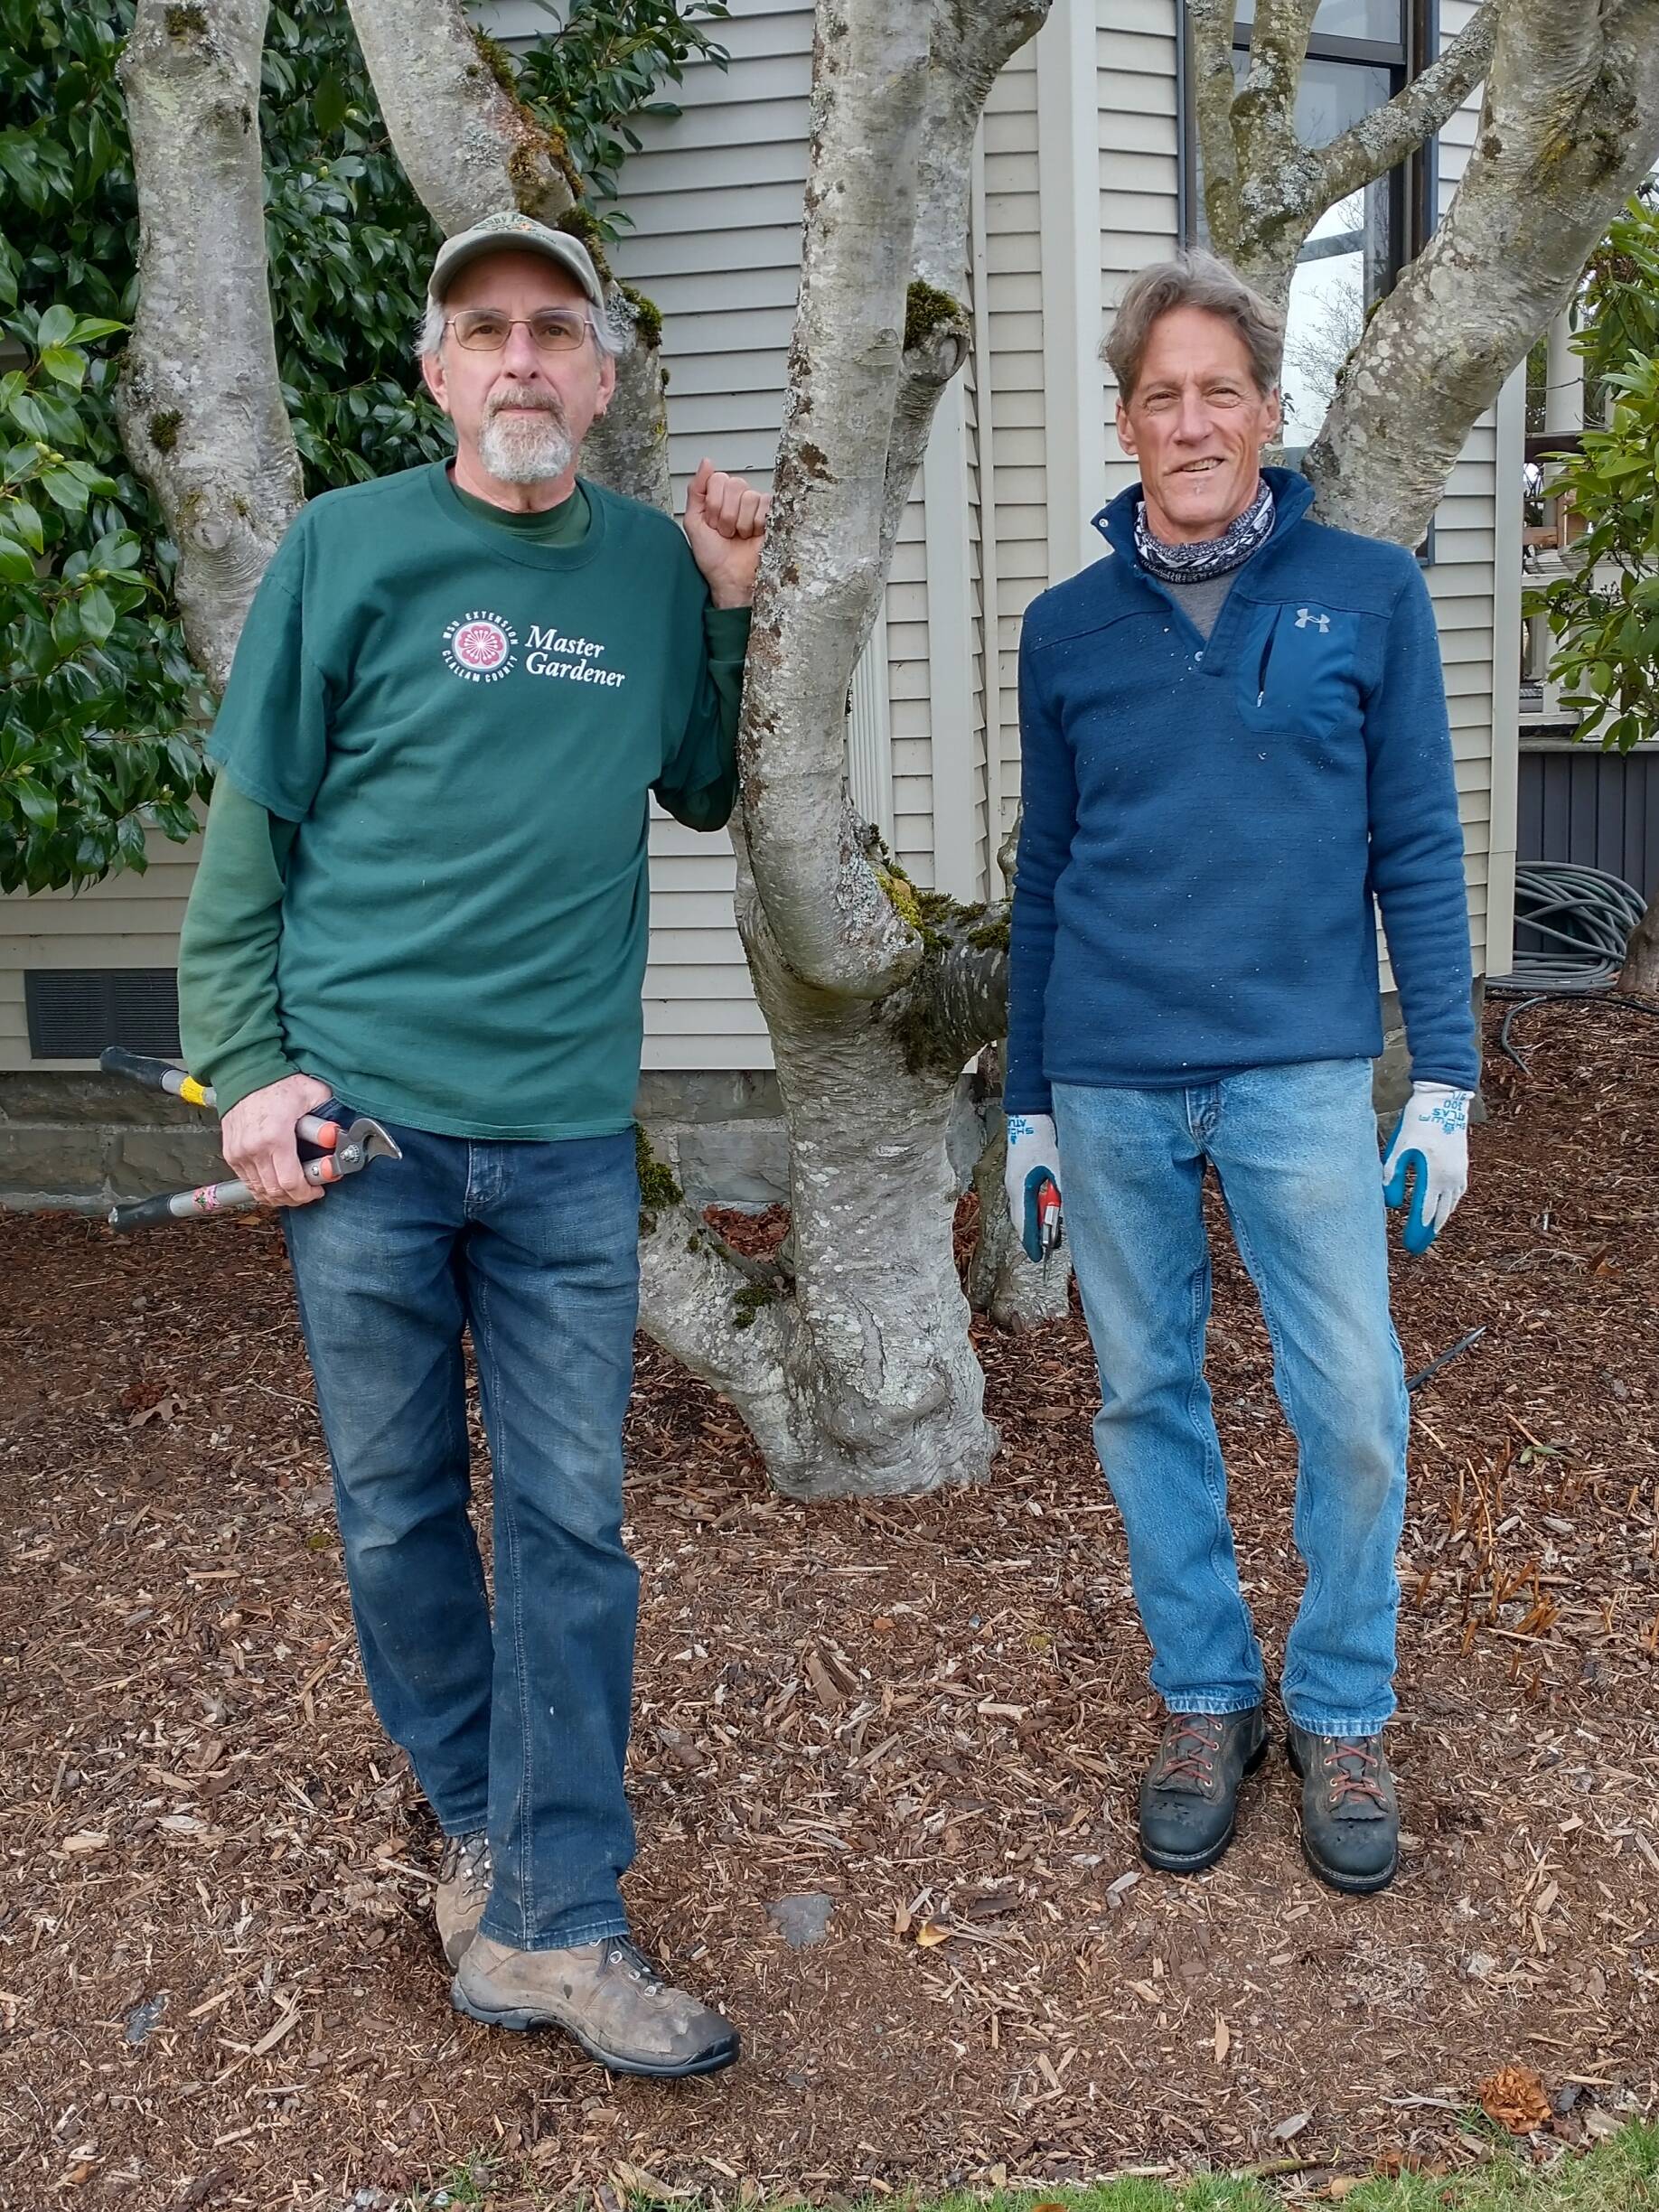 SUCCESSFUL PRUNING. Clallam County Master Gardeners Keith Dekker and Gordon Clark will teach local gardeners how to prune successfully from 10:30 am to 12 noon on Saturday, April 2 at the Demonstration Garden at 2711 Woodcock Road in Sequim. See Clallam County Master Gardener calendar for details.